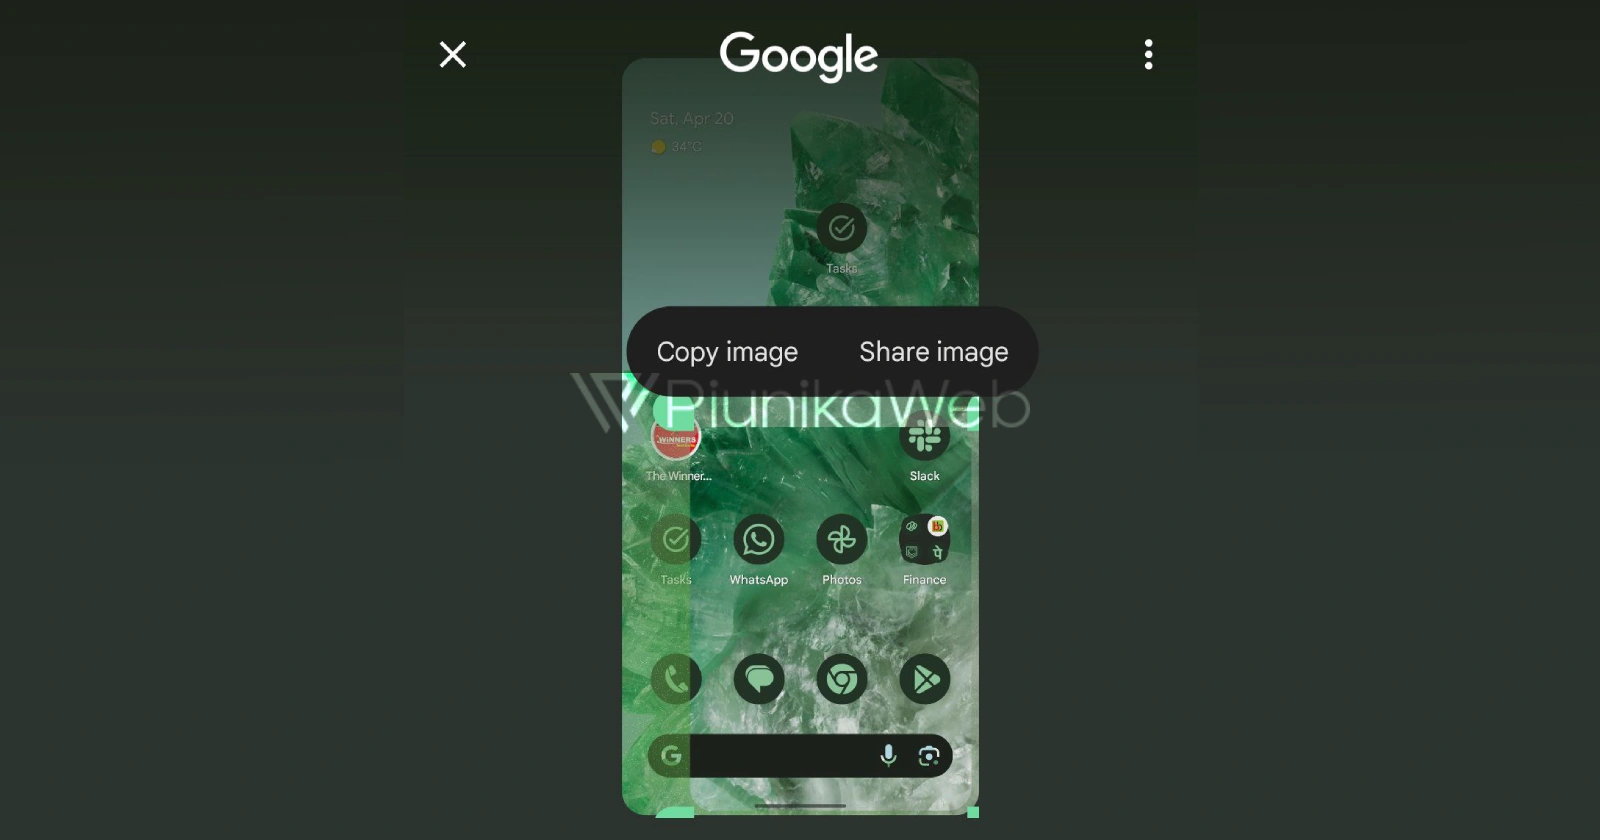 Circle to Search on Pixel will soon let you copy and share selected areas as images